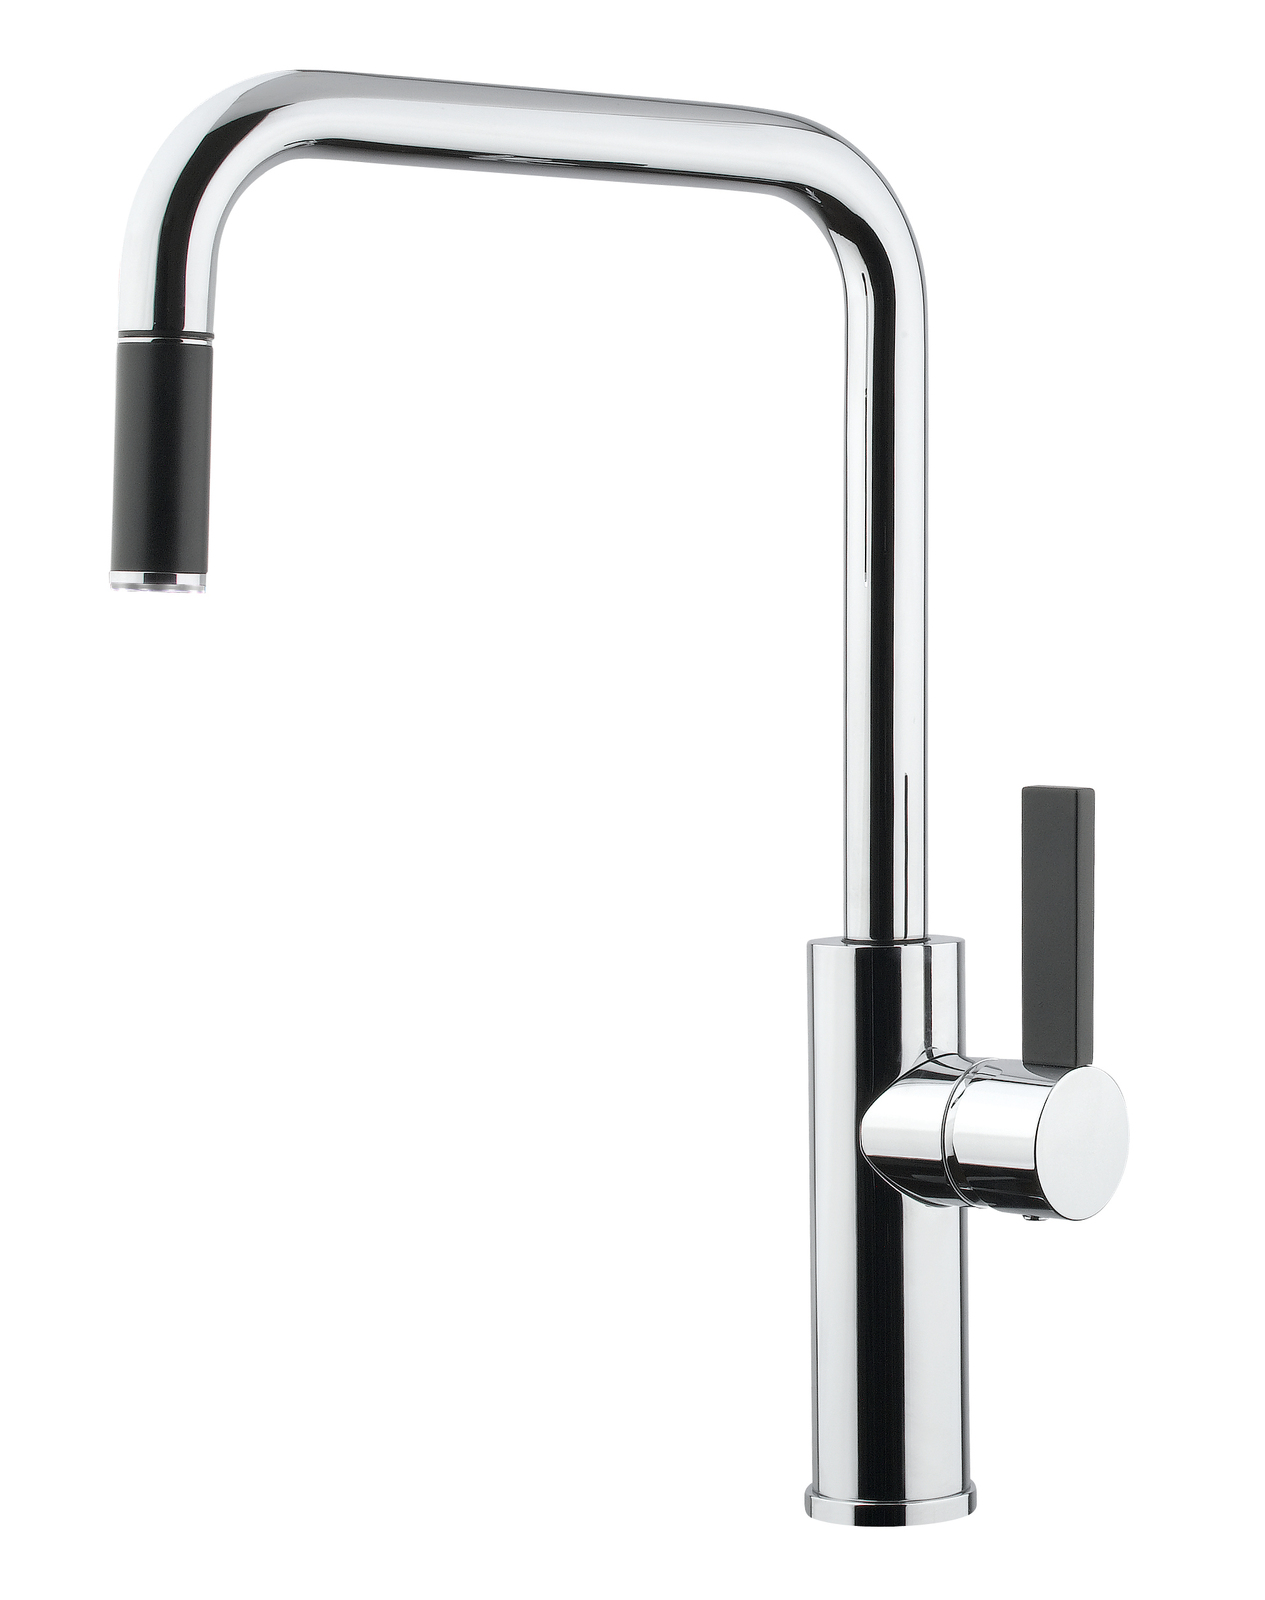 ABEY Sink Mixer Kitchen TAP with Pull Out Chrome Faucet Armando Vicario LUZ